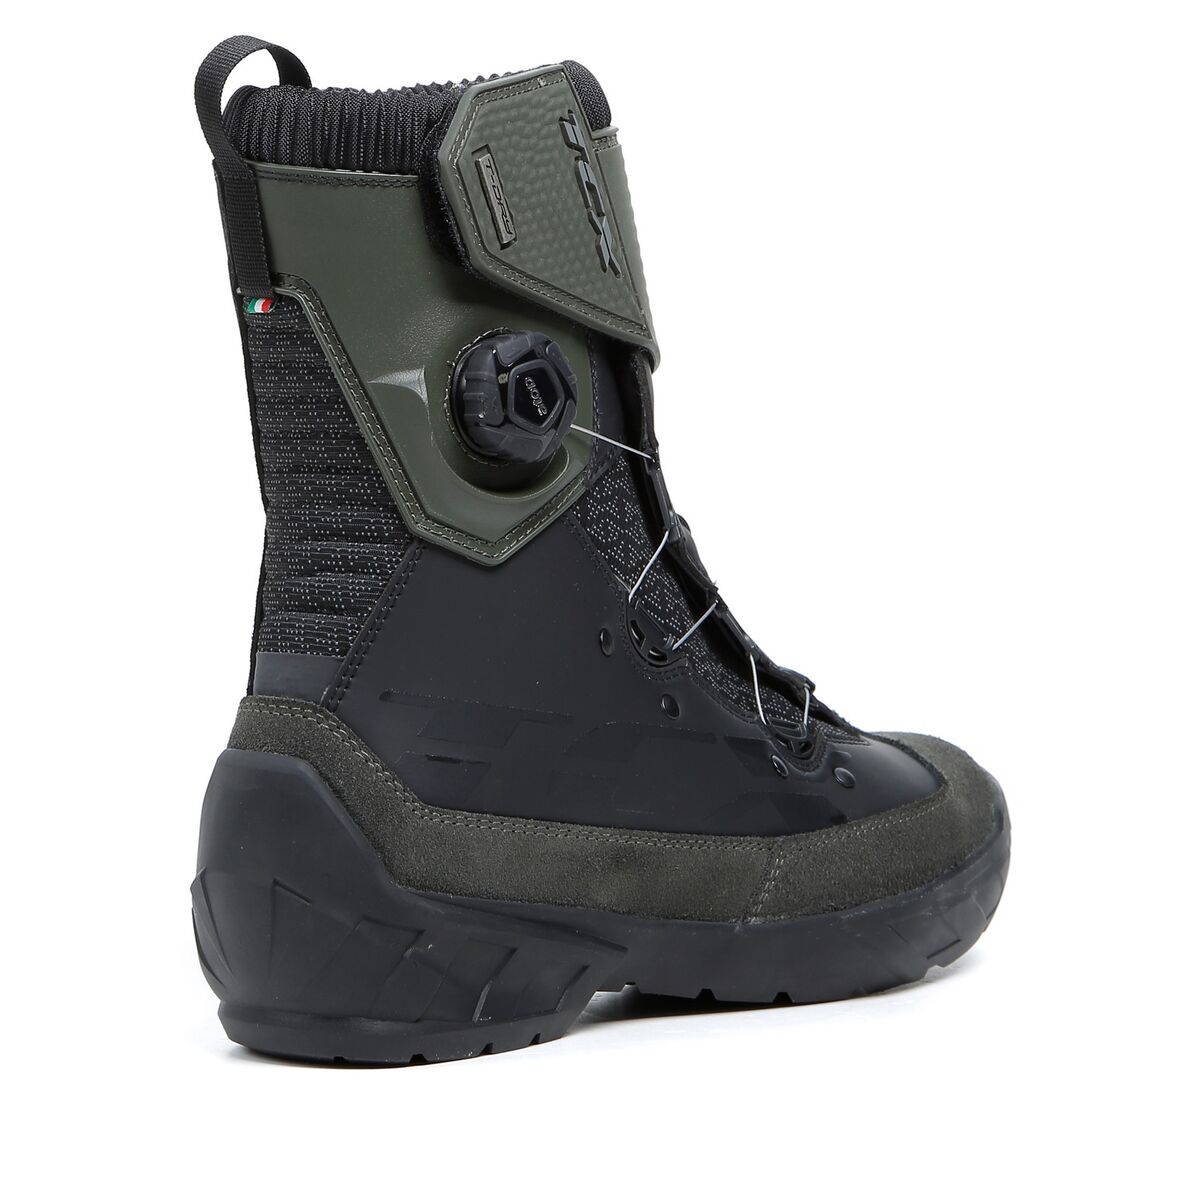 Buy TCX Infinity 3 Mid WP Boots Online with Free Shipping – superbikestore